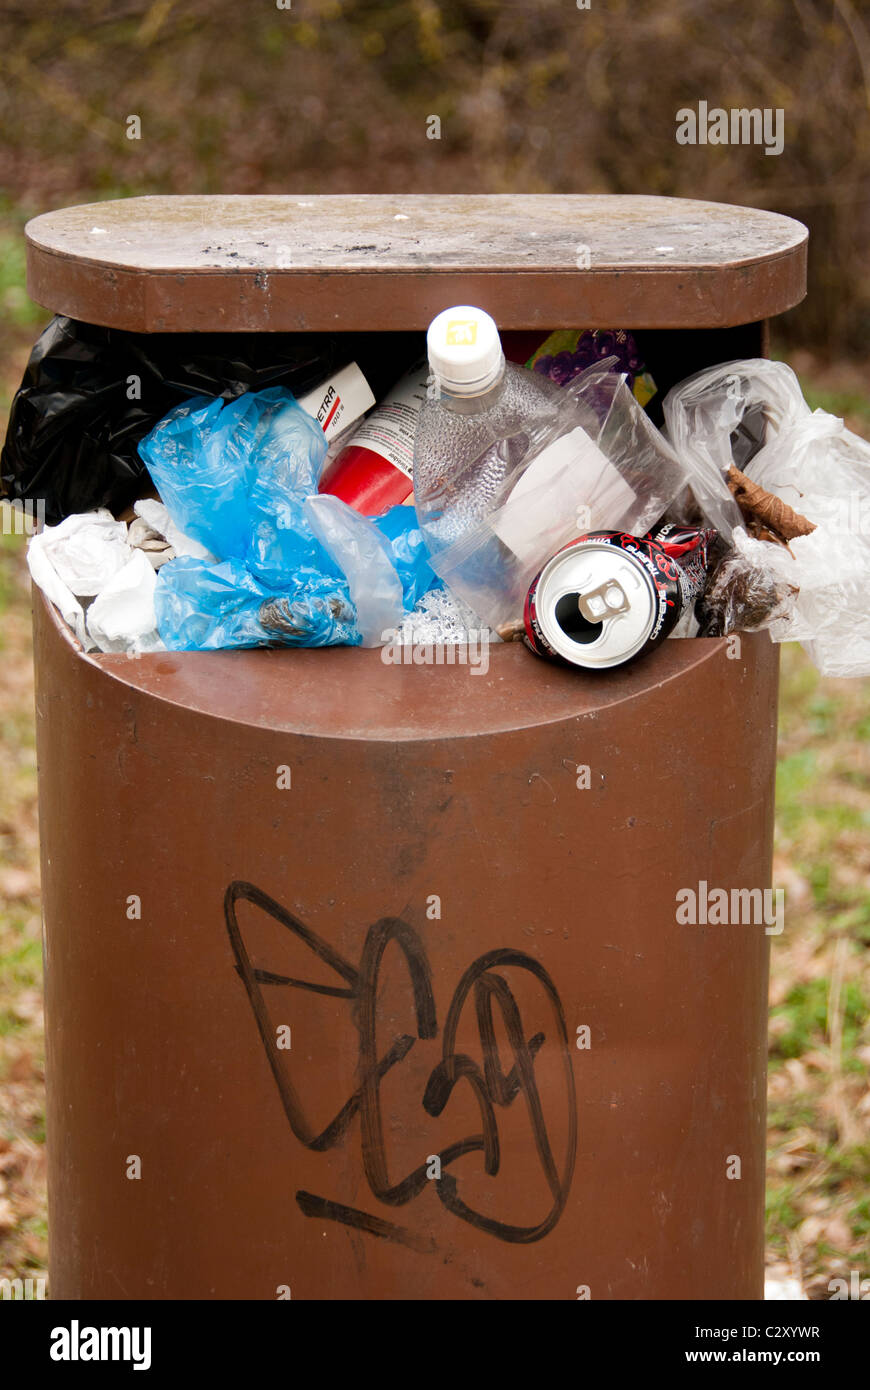 a public litter bin full with garbage Stock Photo